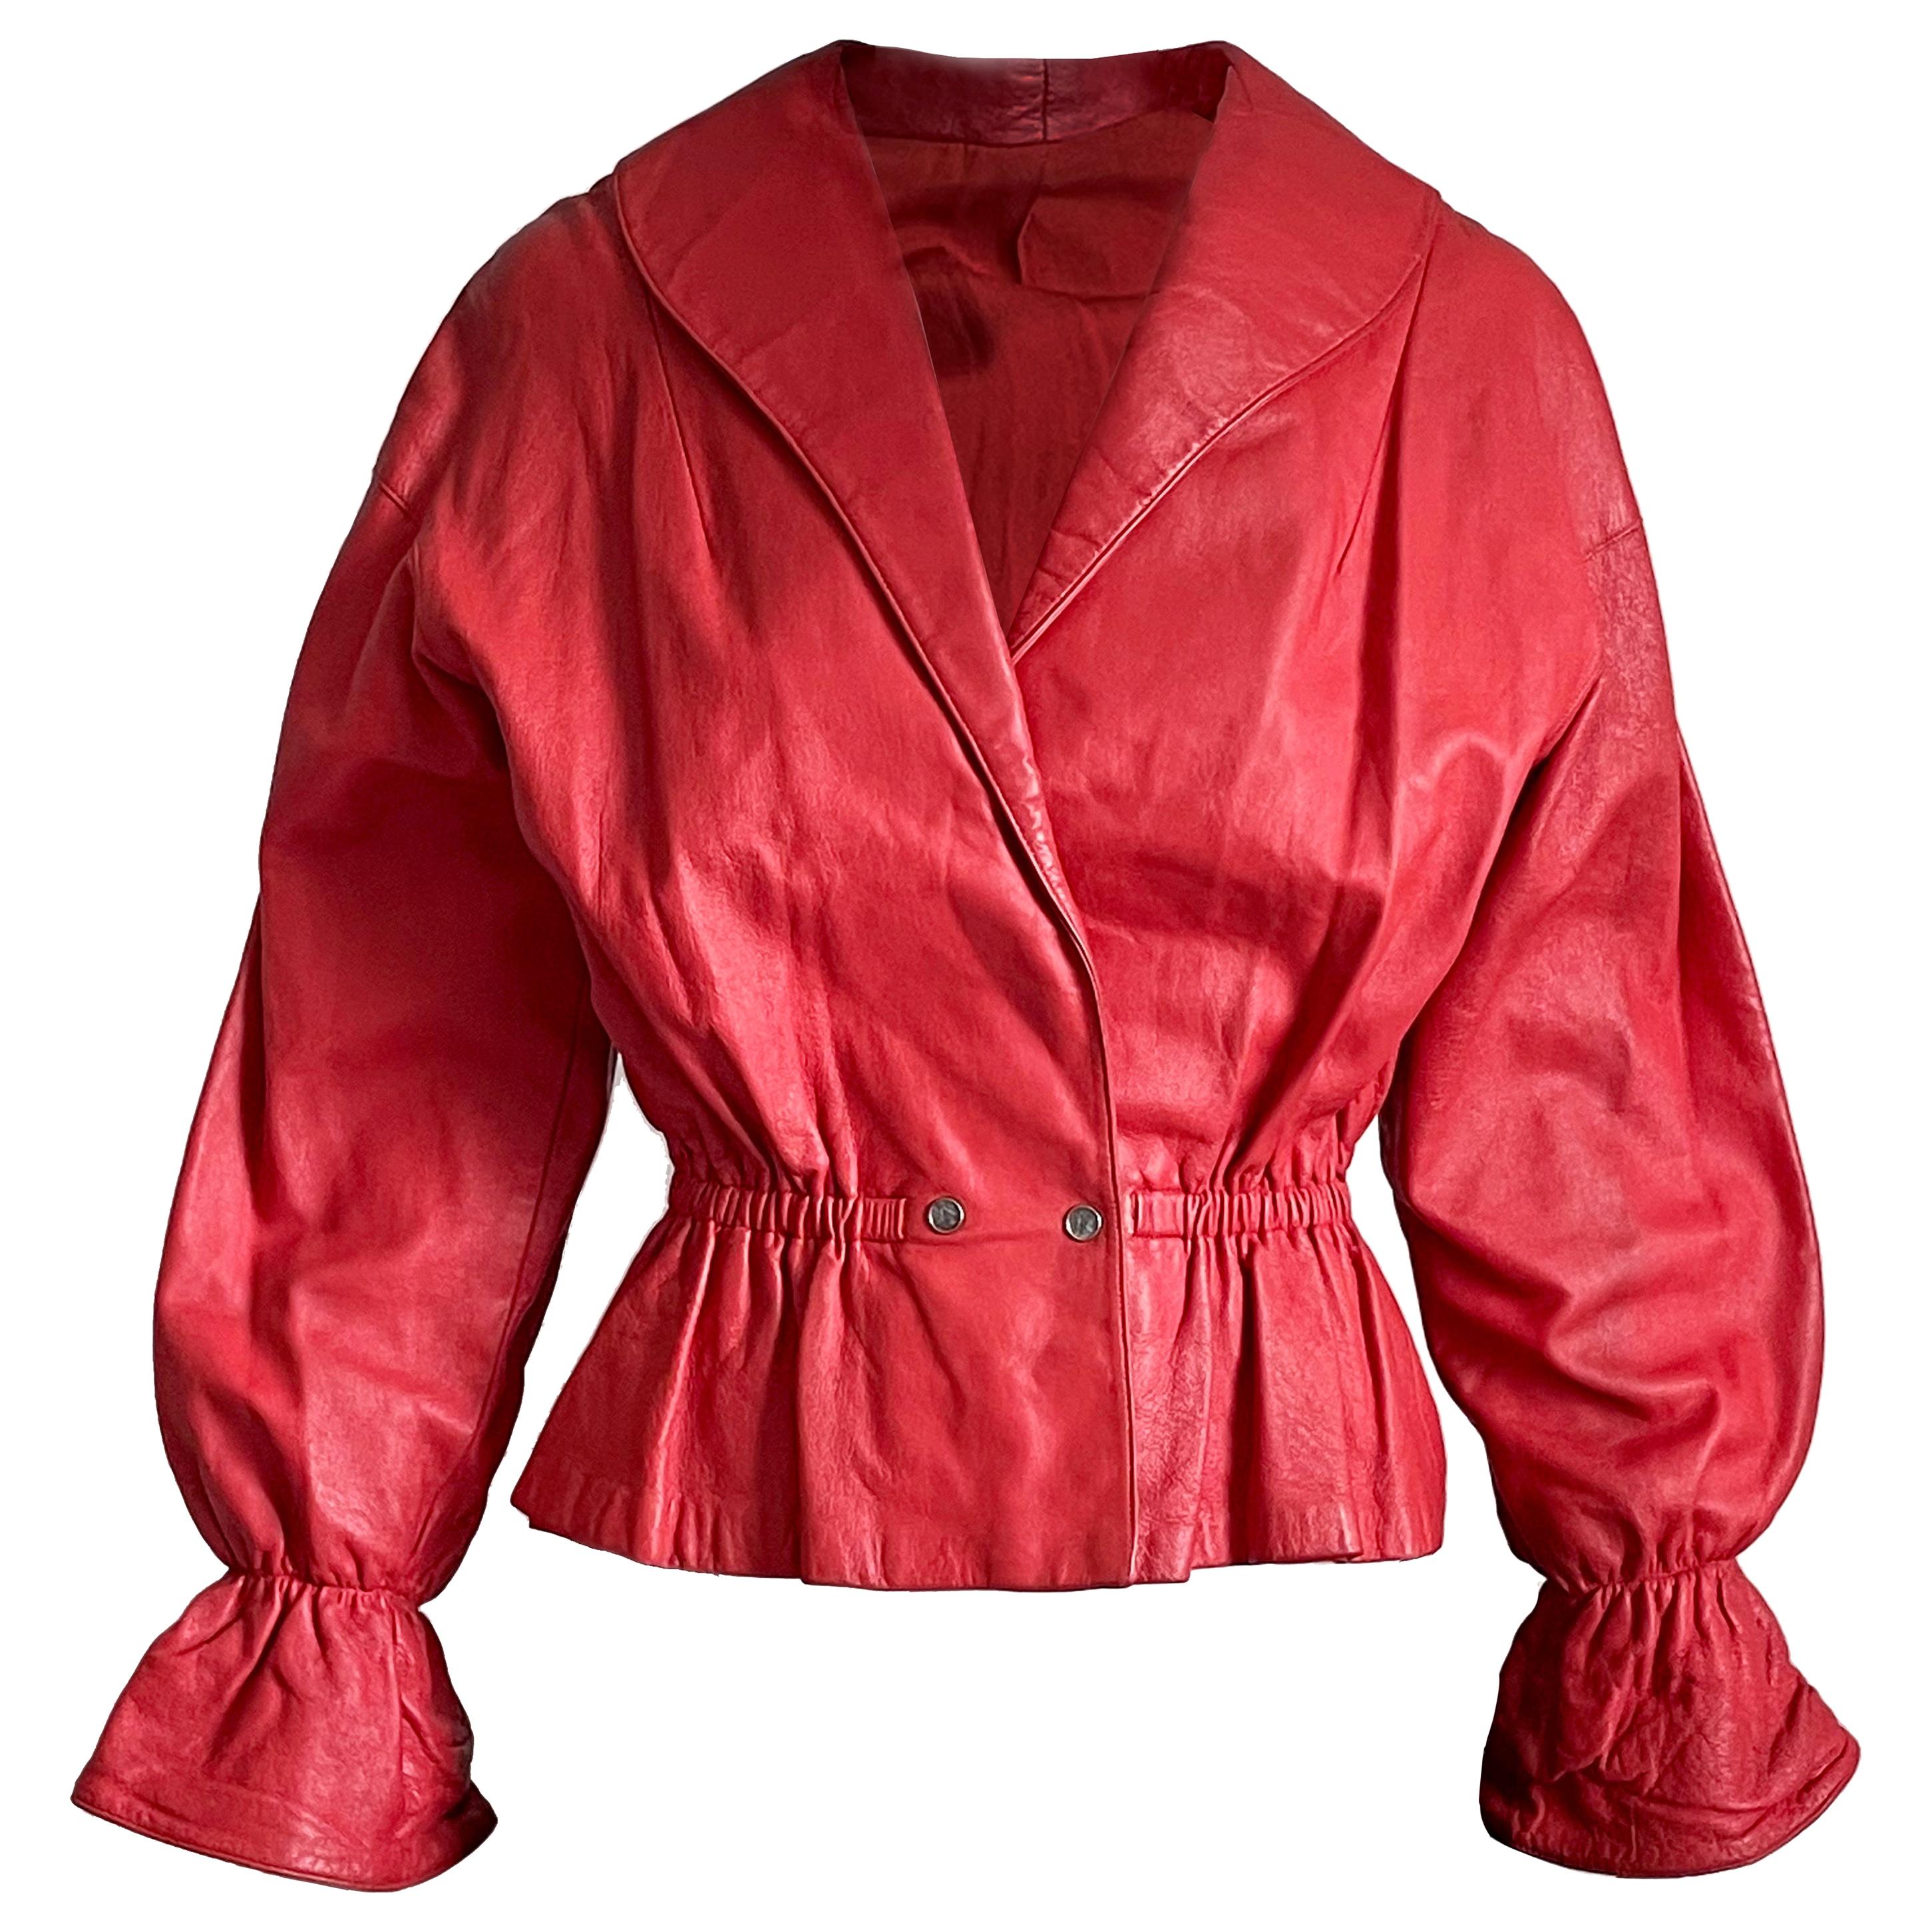 Bonnie Cashin for Sills Red Leather Jacket with Peplum Waist Rare Vintage 1960s  For Sale